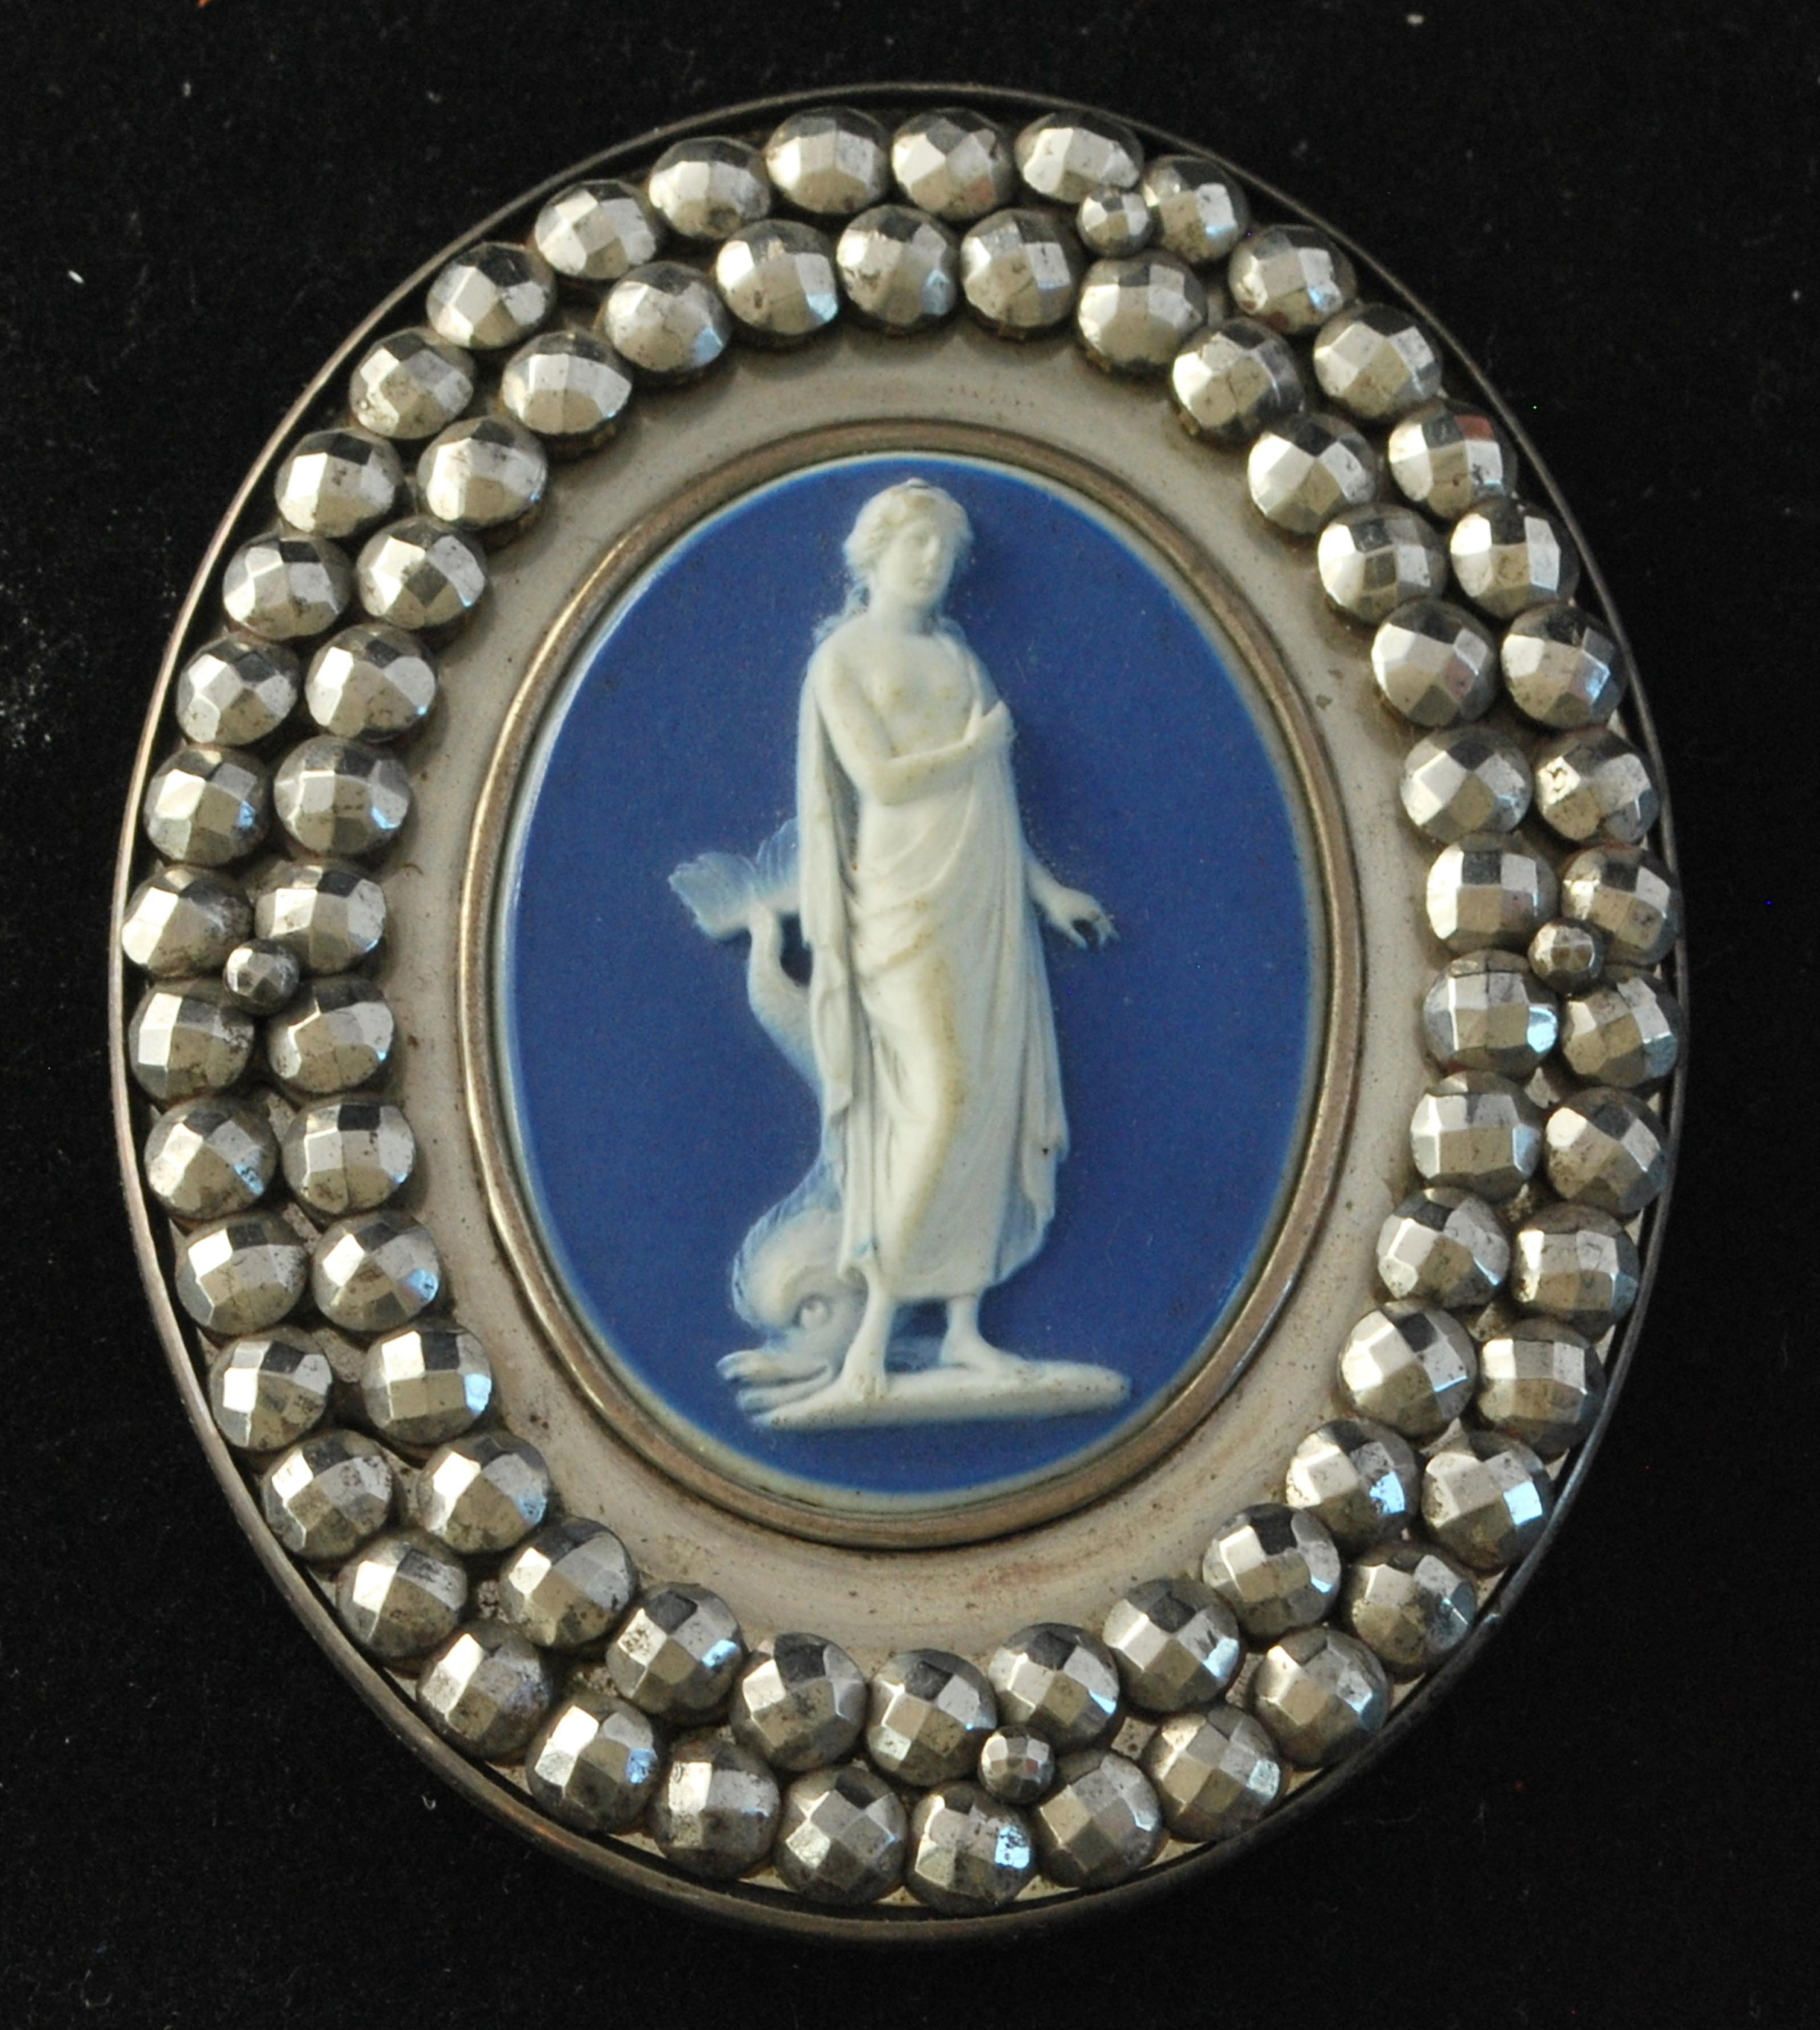 A jasper medallion decorated with Aphrodite, set in cut steel as a buckle, probably by Matthew Boulton. Original box.

The Greek goddess Aphrodite is often depicted in ancient art with a dolphin. In mythology, dolphins were considered sacred to